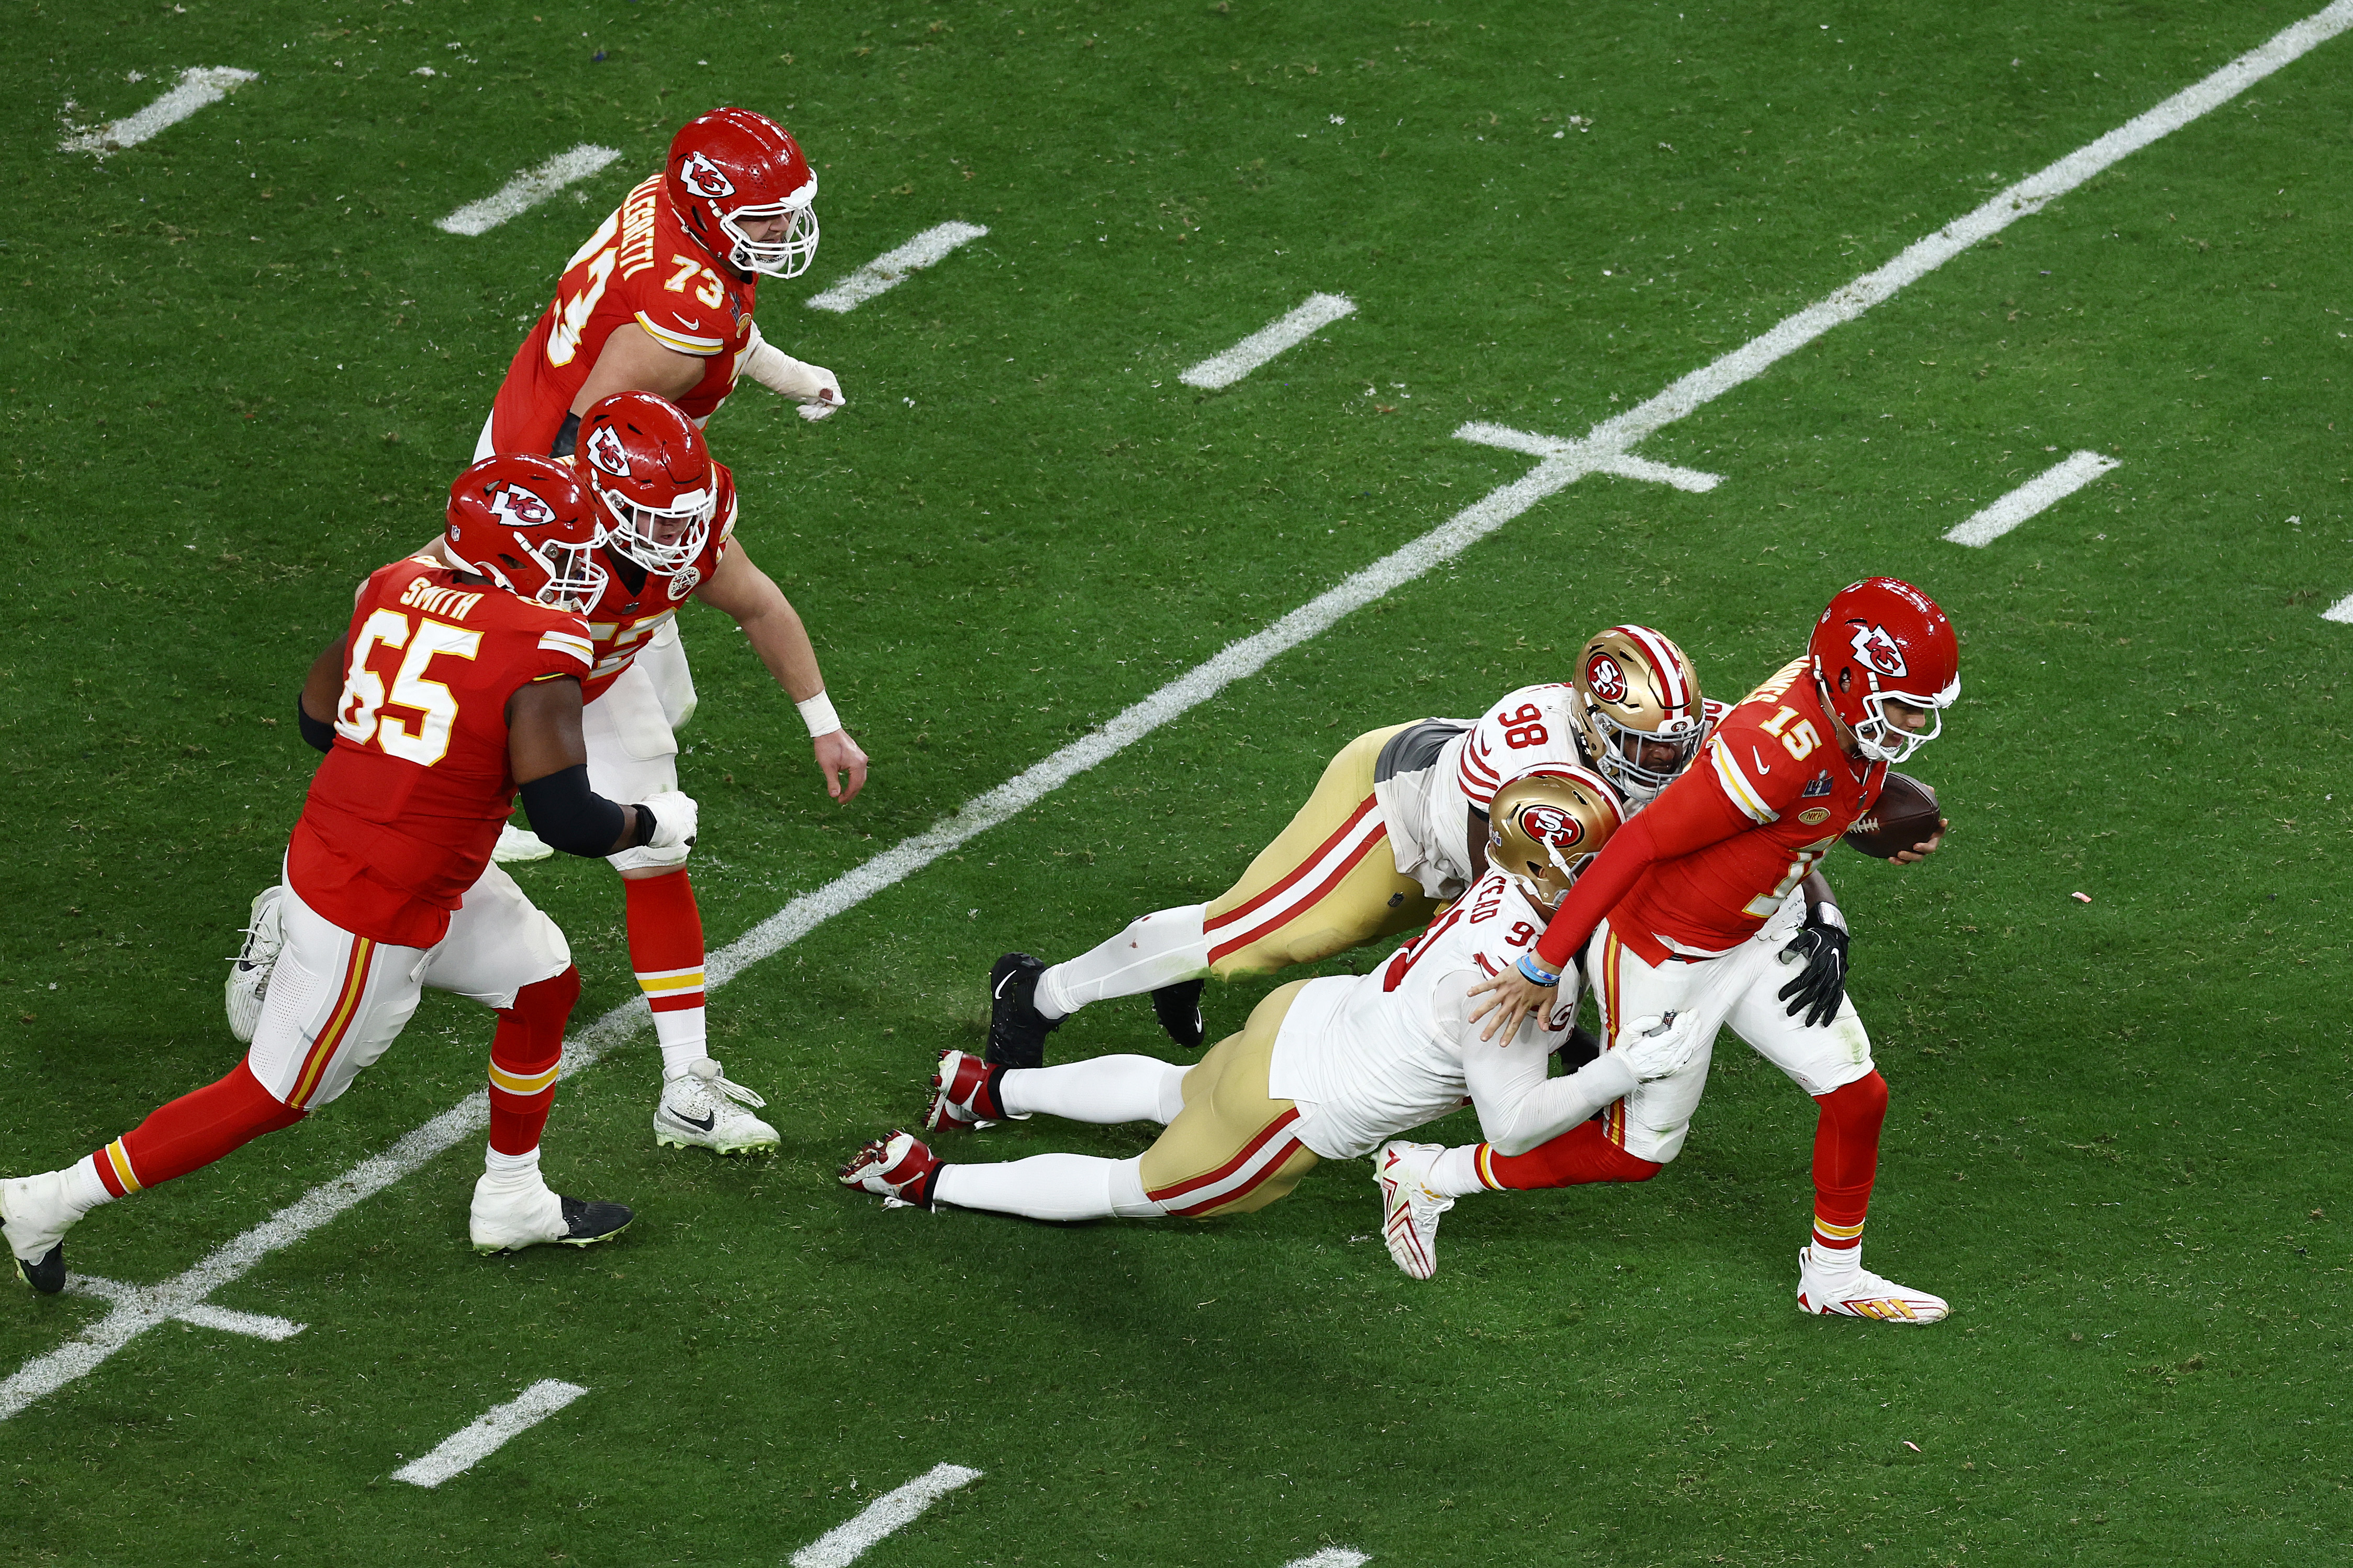 Patrick Mahomes #15 of the Kansas City Chiefs tries to avoid being tackled by Arik Armstead #91 and Javon Hargrave #98 of the San Francisco 49ers